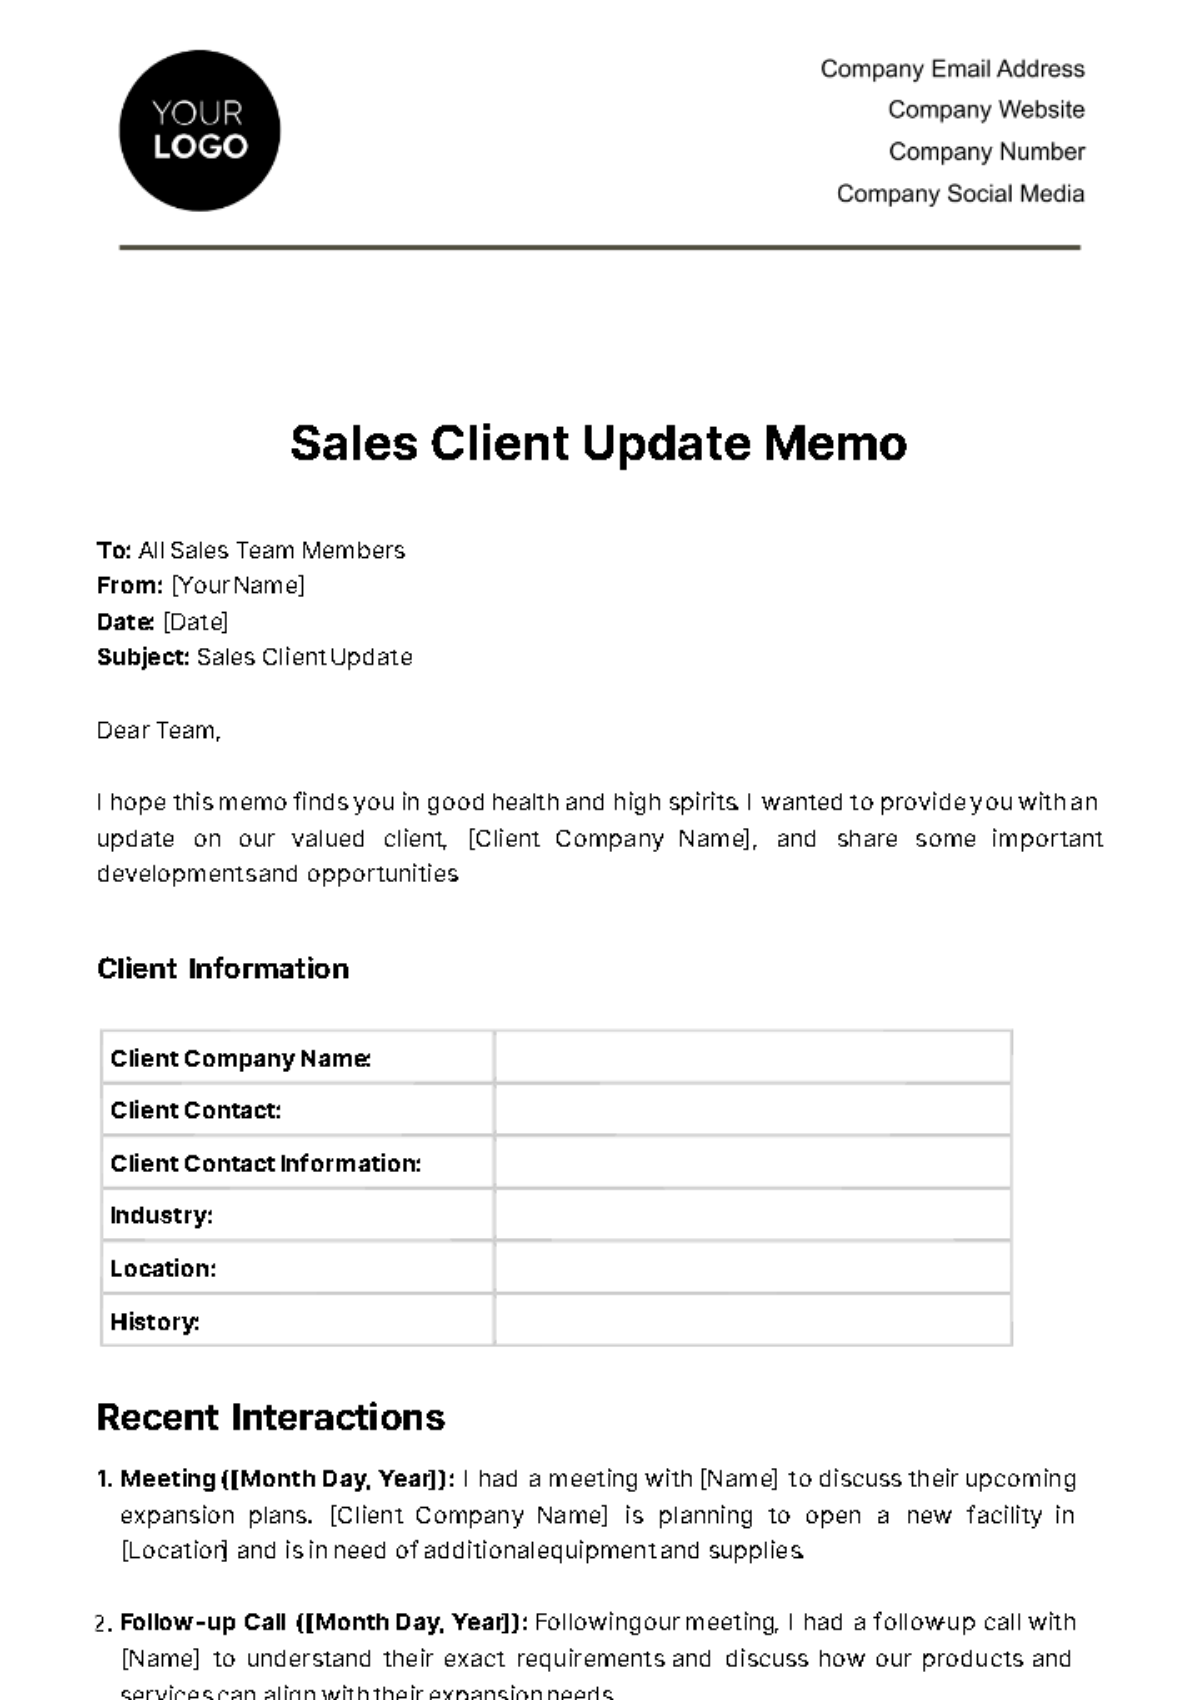 Free Sales Client Update Memo Template